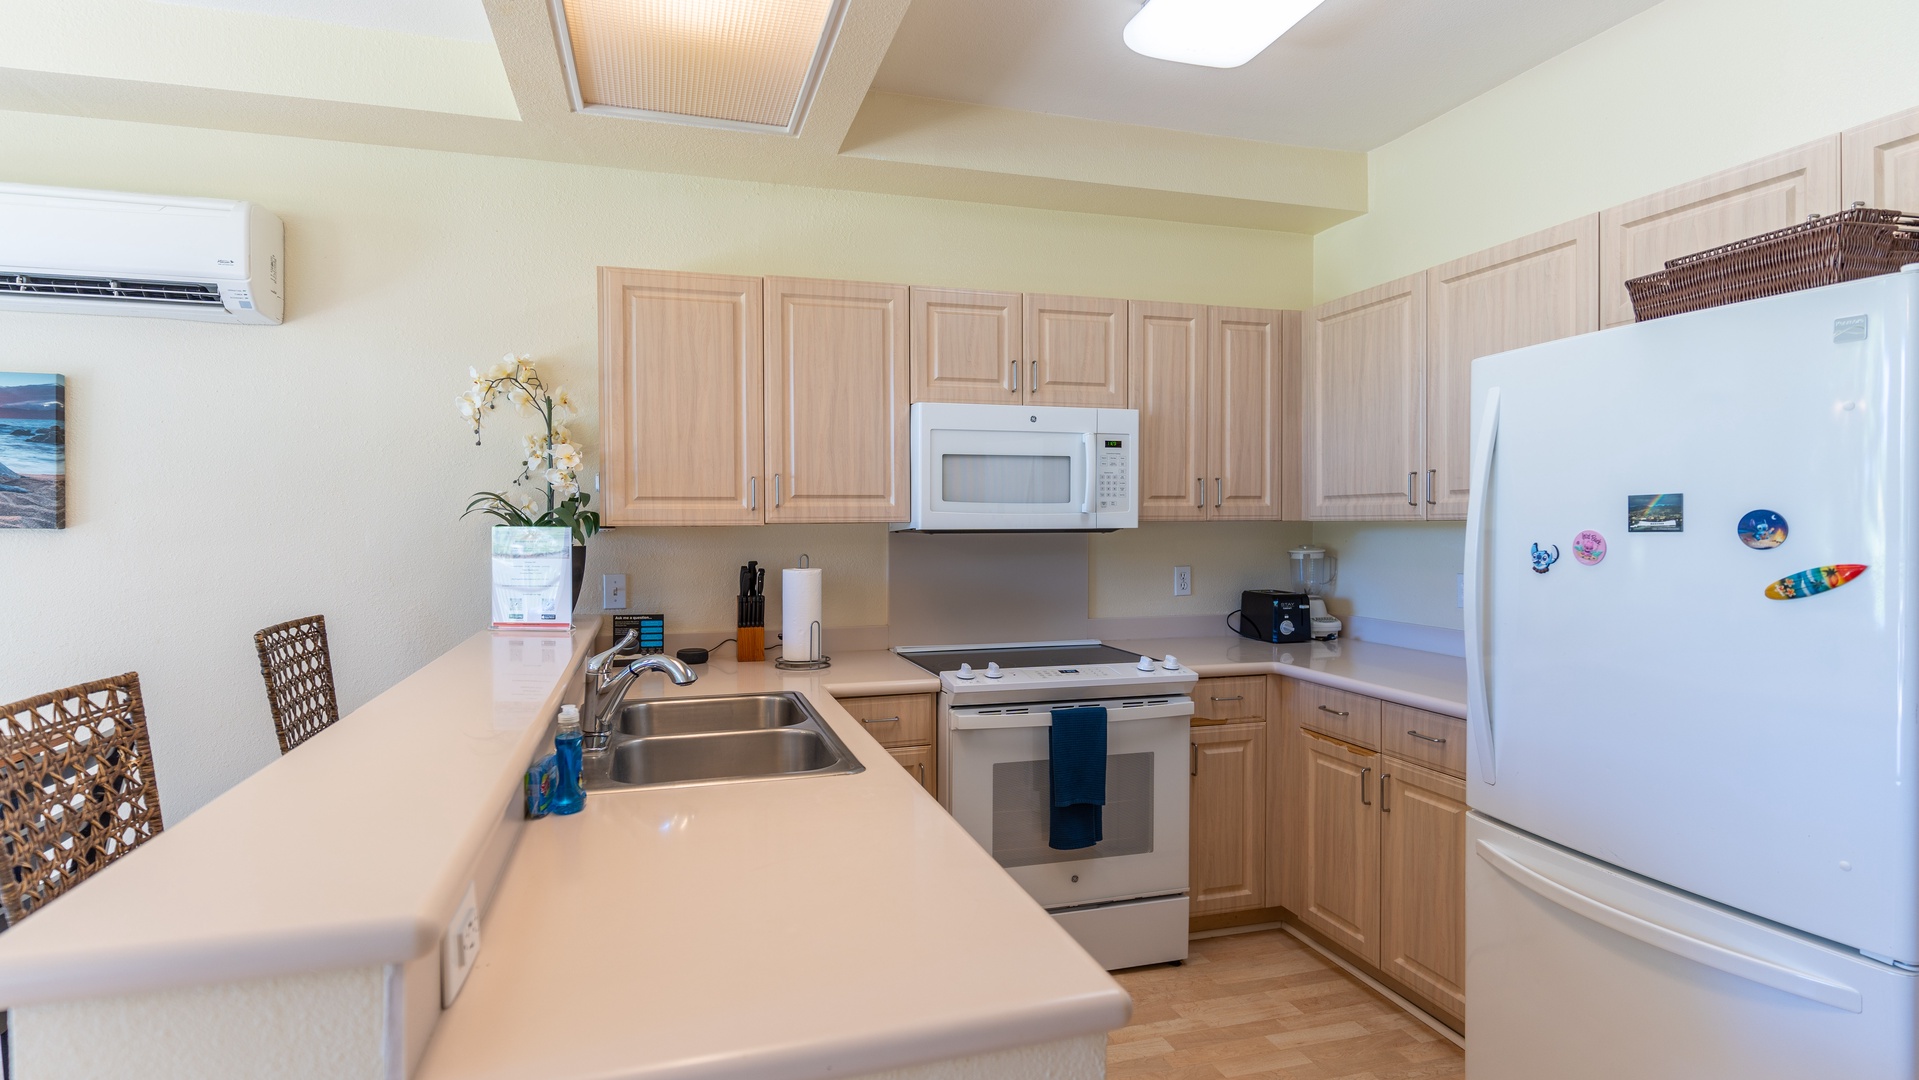 Kapolei Vacation Rentals, Fairways at Ko Olina 18C - The bright kitchen features a fridge, oven, extended counter-tops and bar seating.